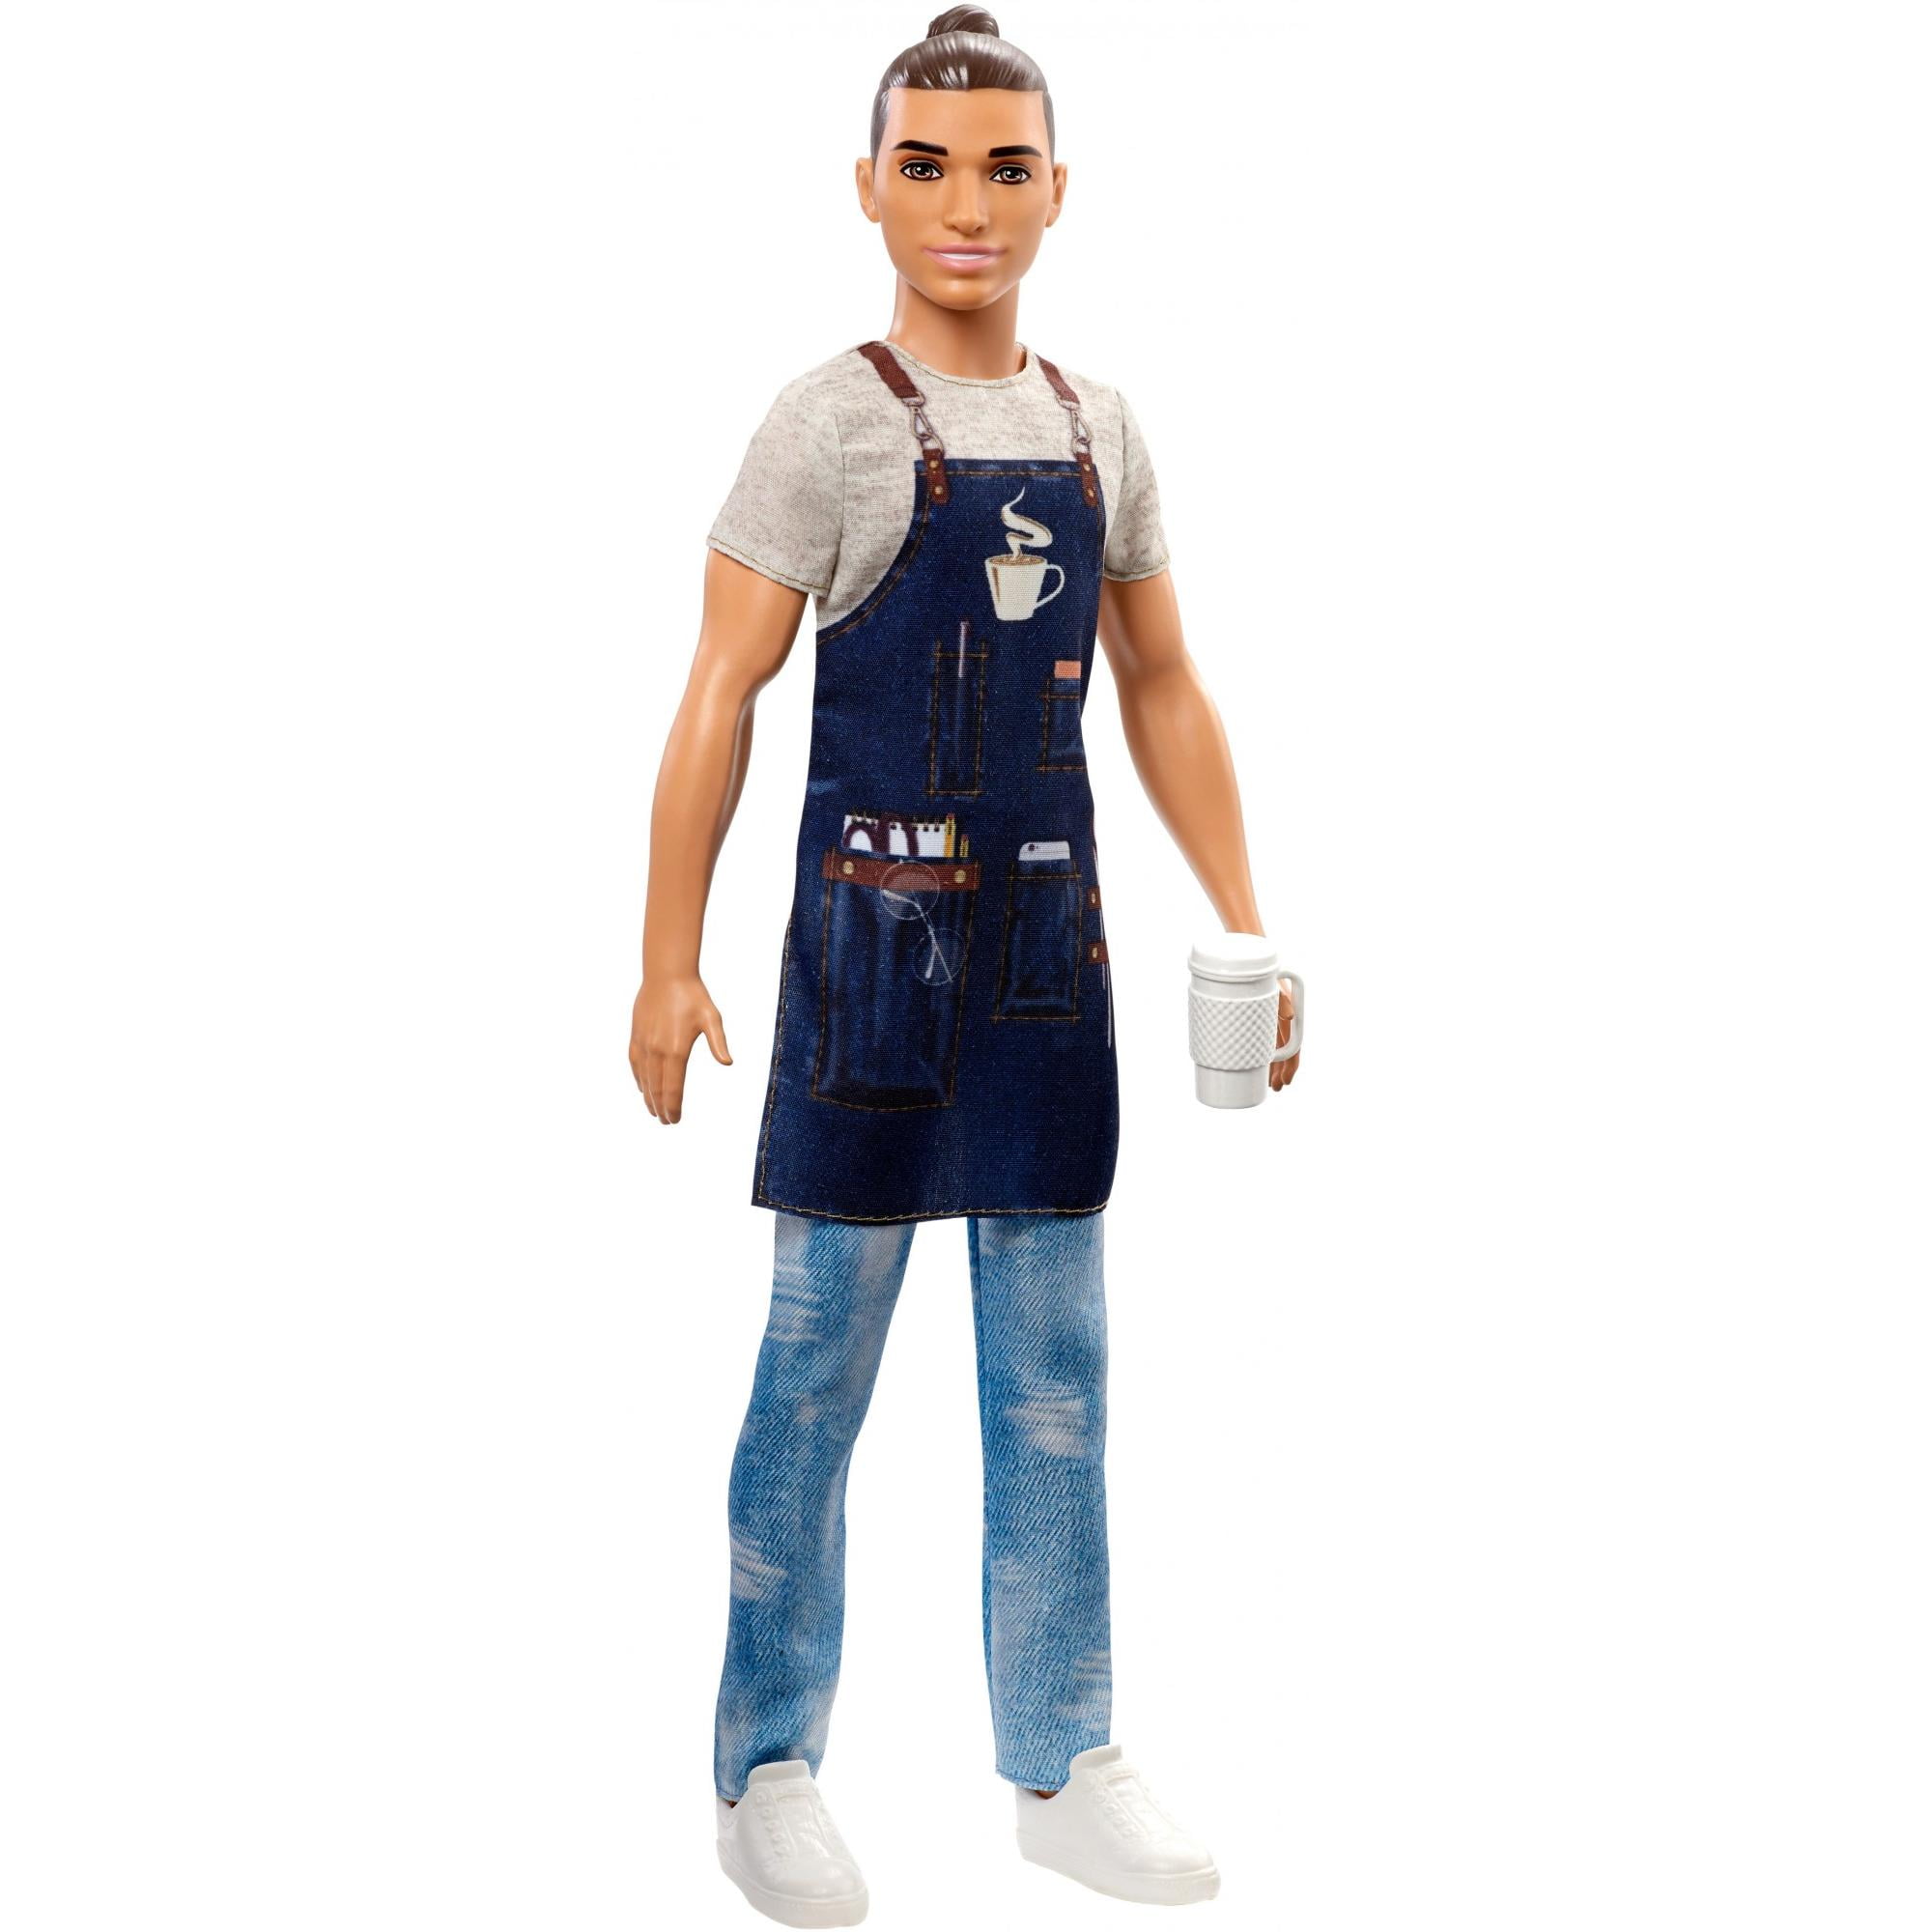 Barbie Ken Careers Barista Doll with 